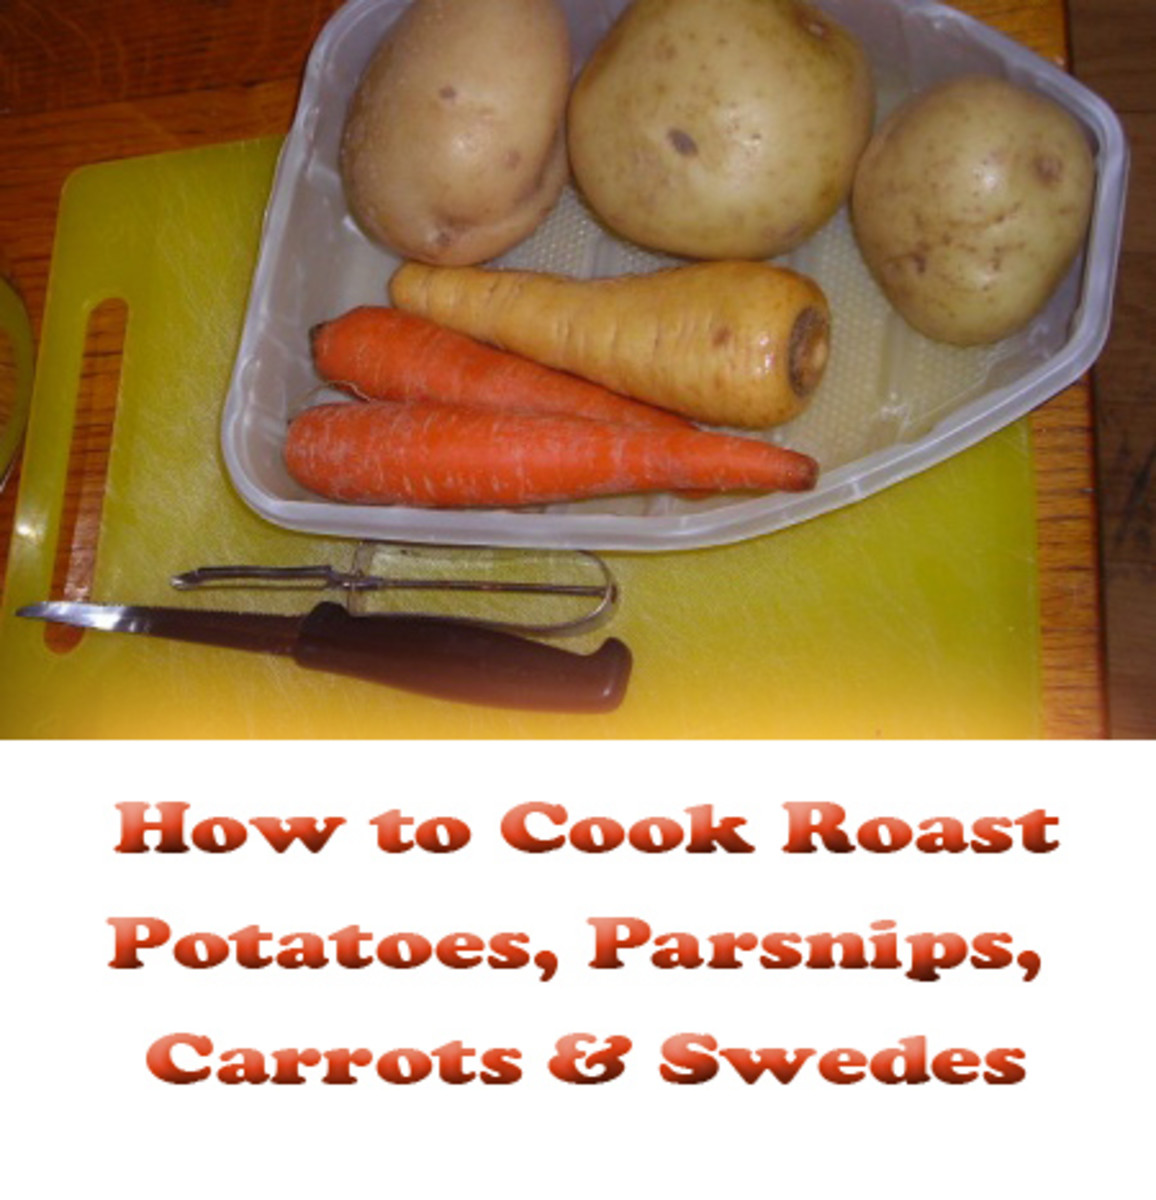 These are some of my favorite vegetables: potatoes, parsnips, carrots and swedes.